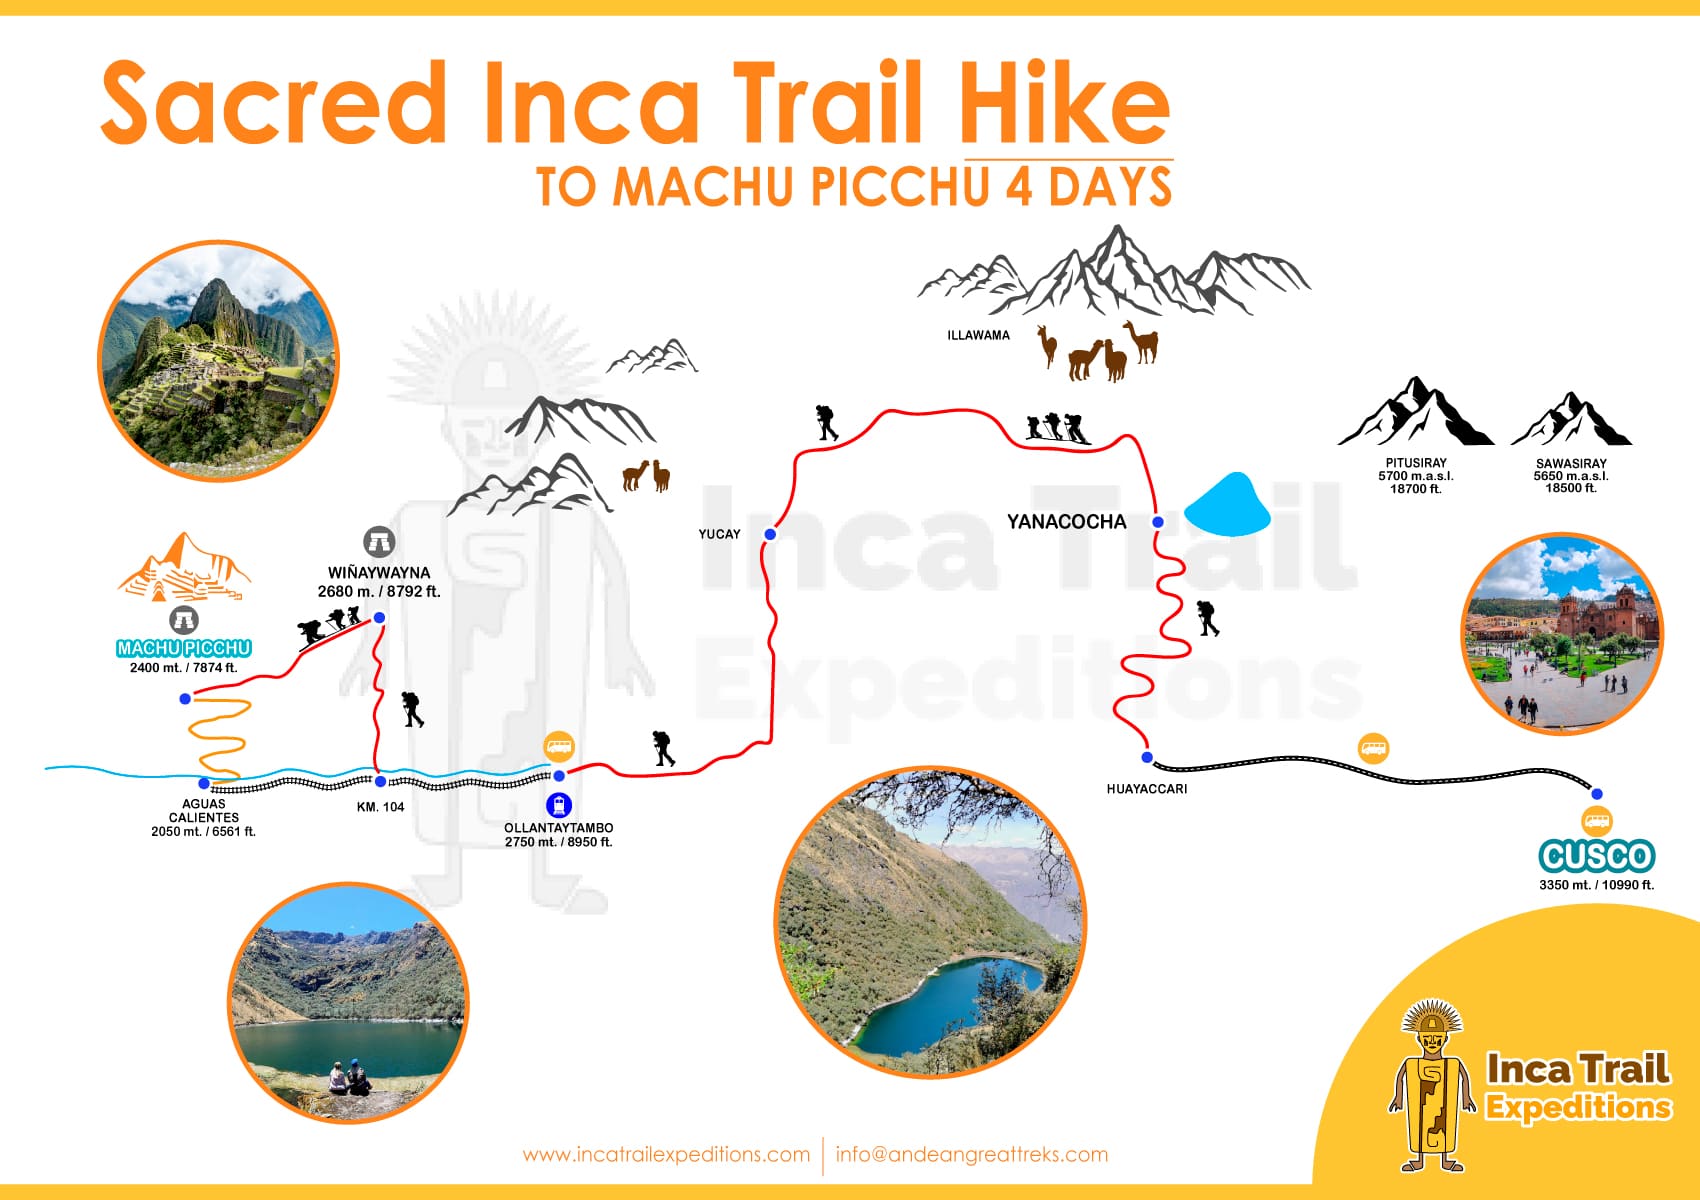 SACRED-INCA-TRAIL-HIKE-TO-MACHU-PICCHU-4-DAYS-BY-INCA-TRAIL-EXPEDITIONS